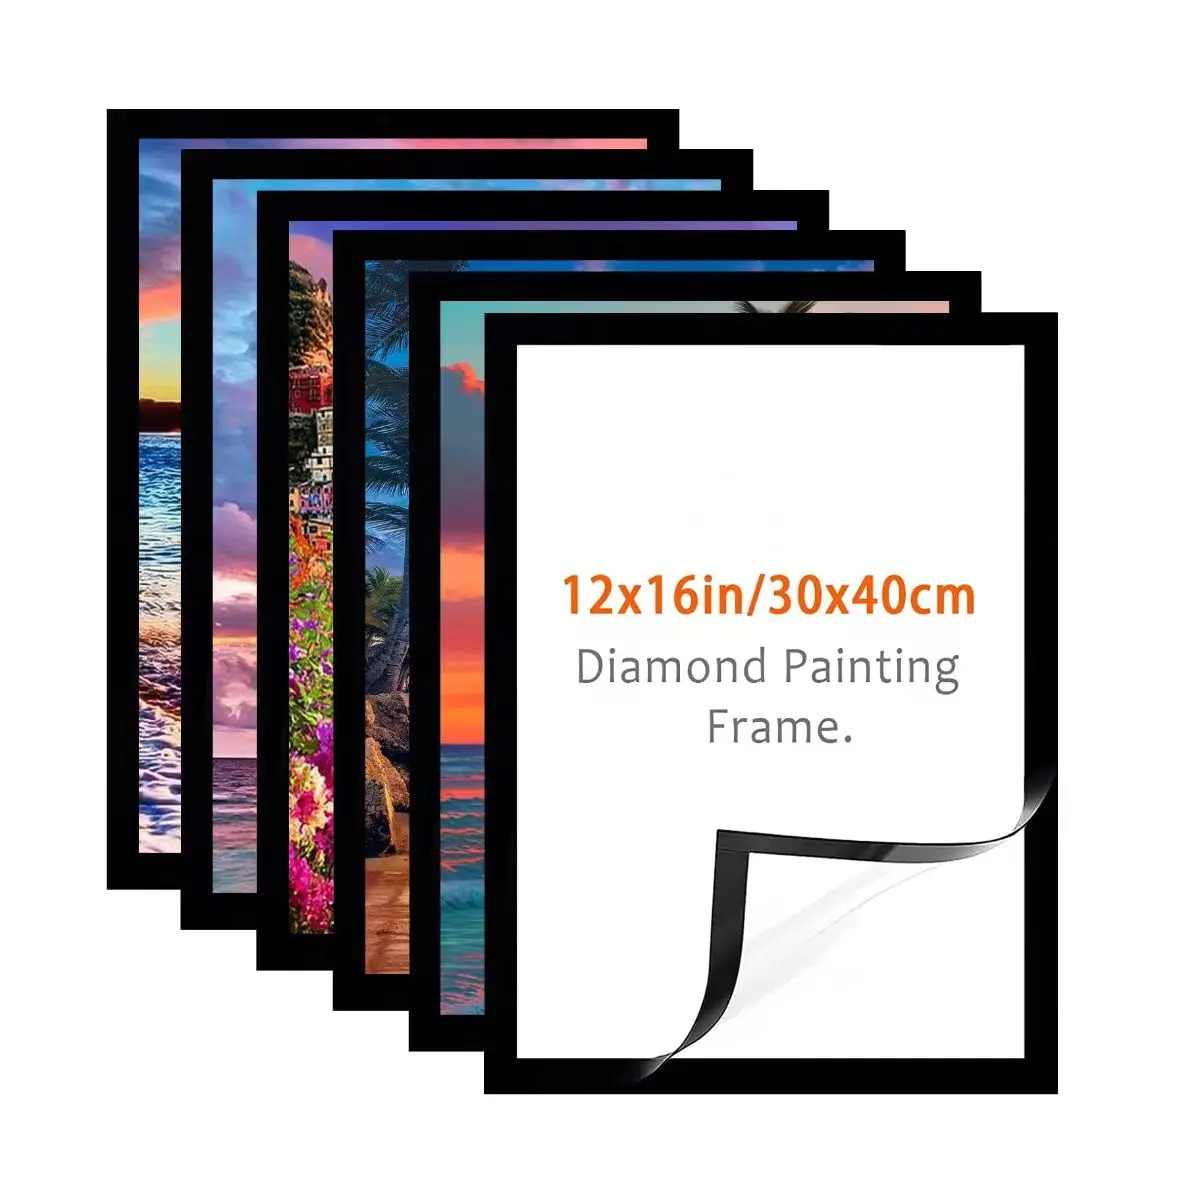 Diamond Painting Frames, Frames For 12x16in/30x40cm Diamond Painting  Canvas, Magnetic Diamond Art Frame Self-adhesive Diamond Art Accessories,  Frames